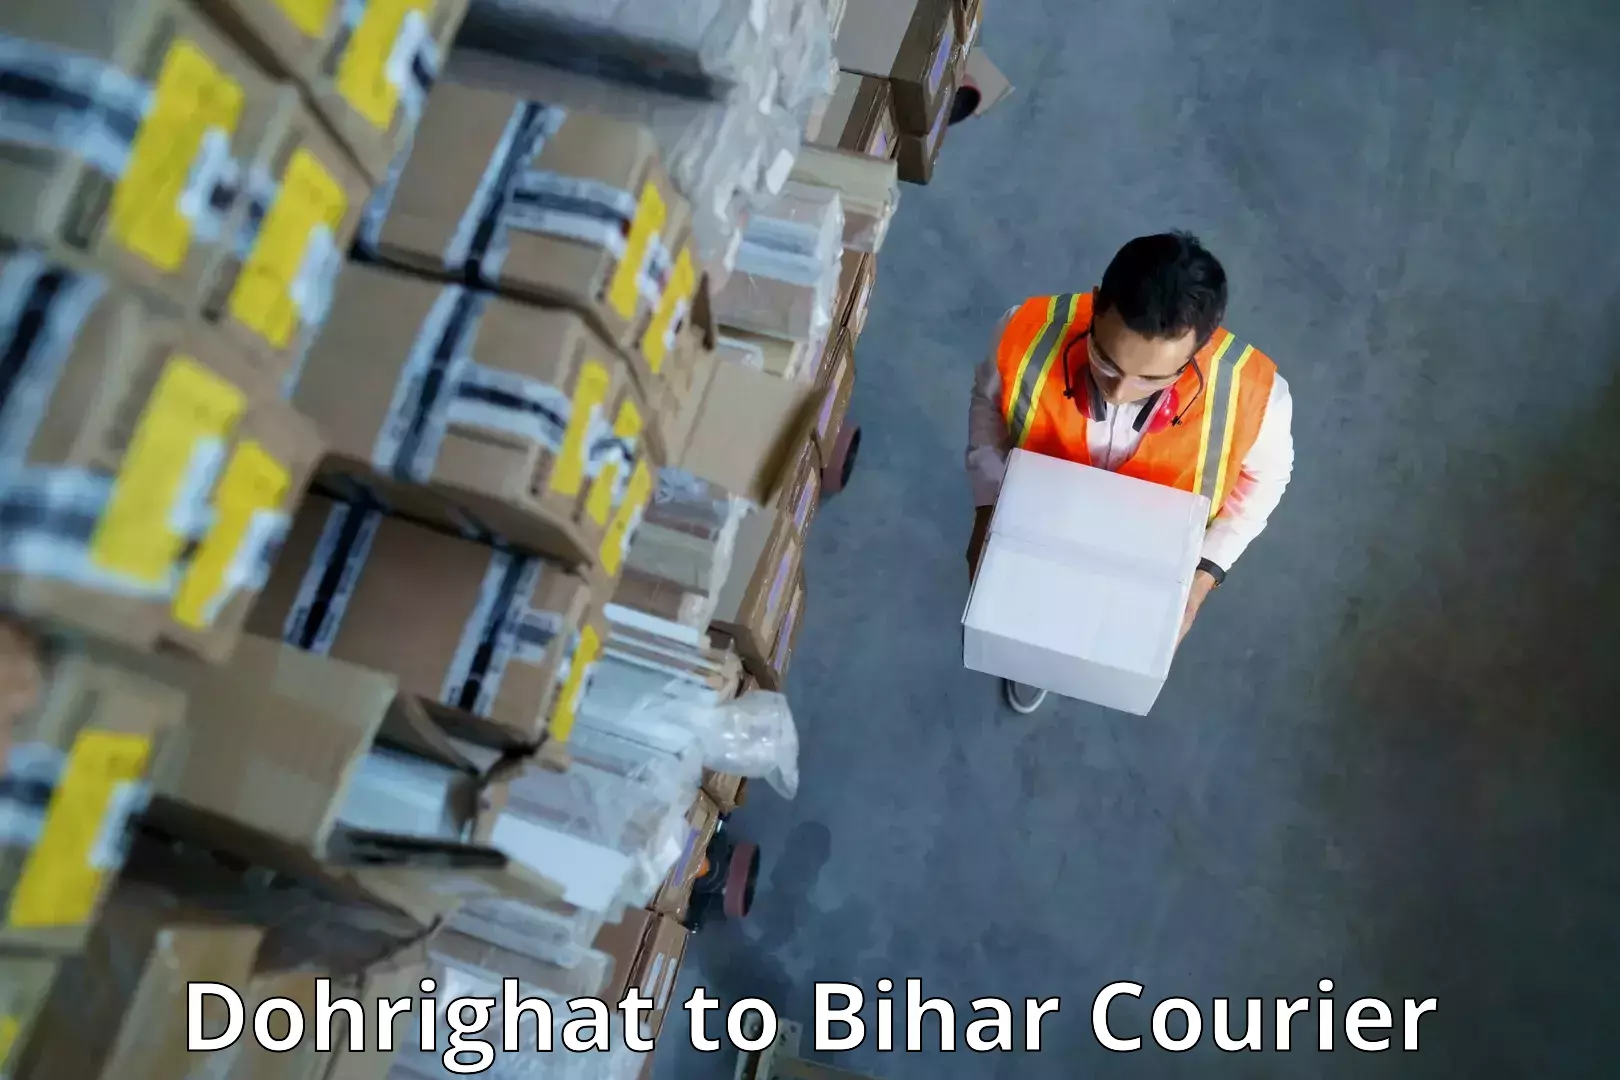 On-call courier service Dohrighat to Bihar